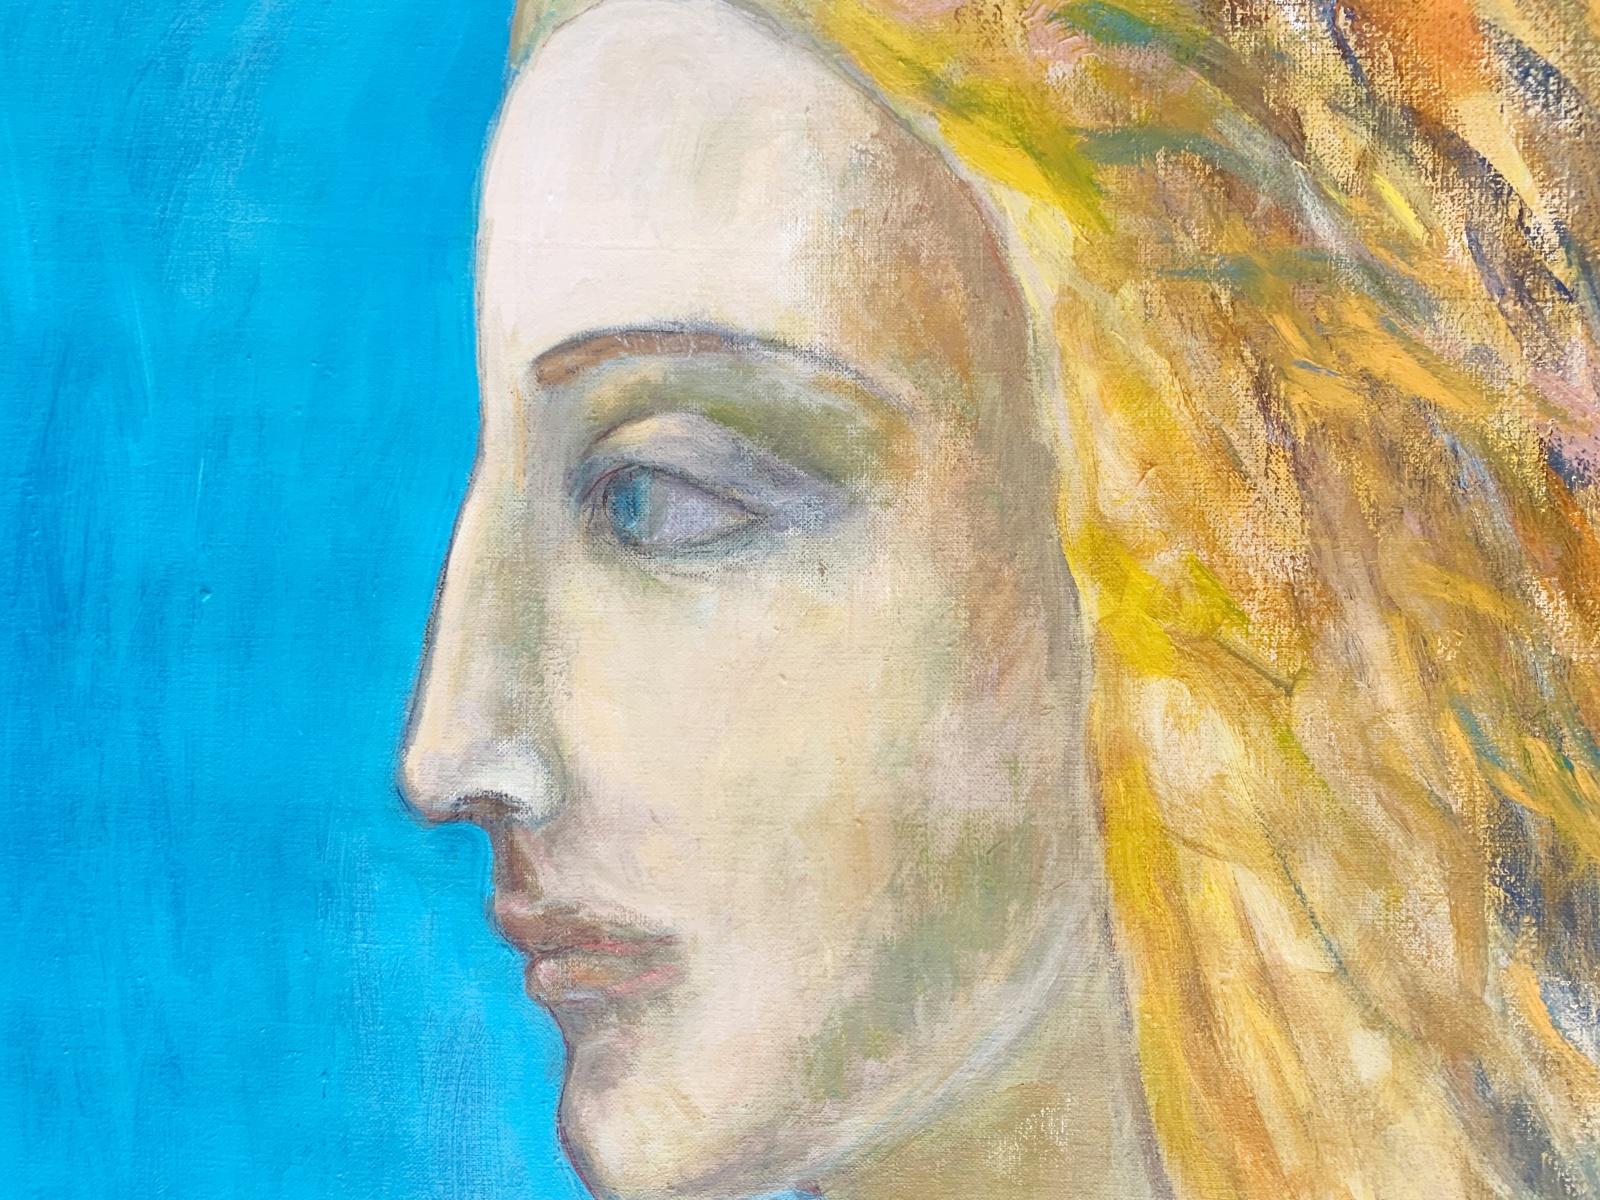 An Angel. Oil figurative painting, Landscape, Colorful, Vibrant, Portrait  - Other Art Style Painting by Iszchan Nazarian